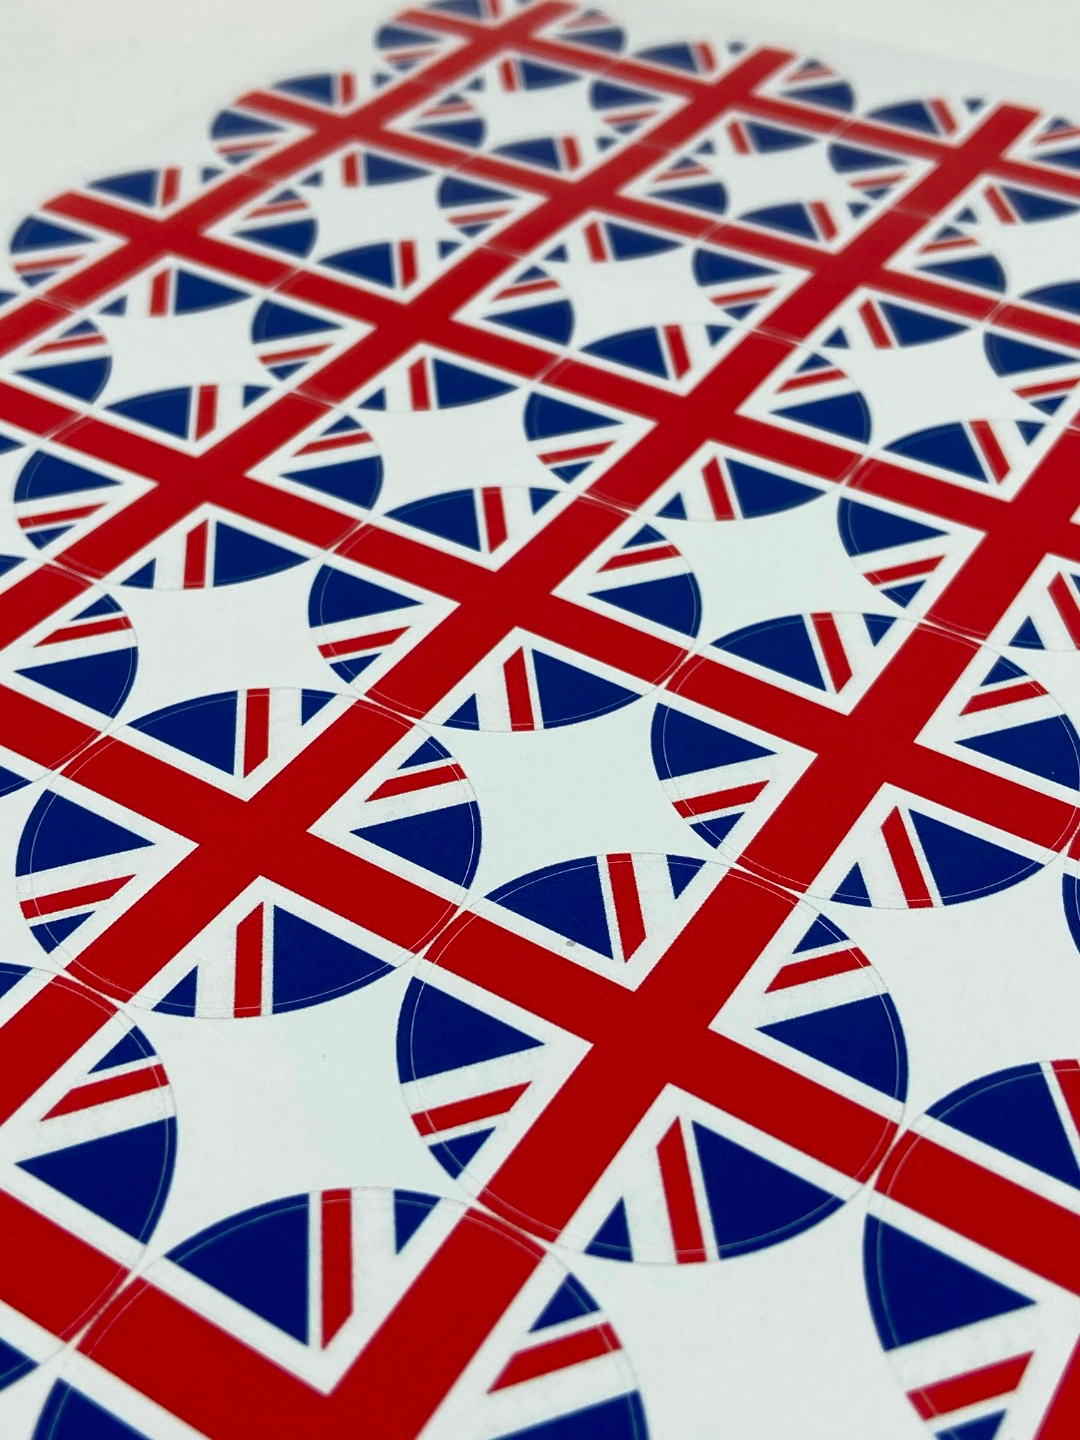 Union Jack Stickers 35 per sheet greaf for loot bags, sweet cane candy bags 37mm